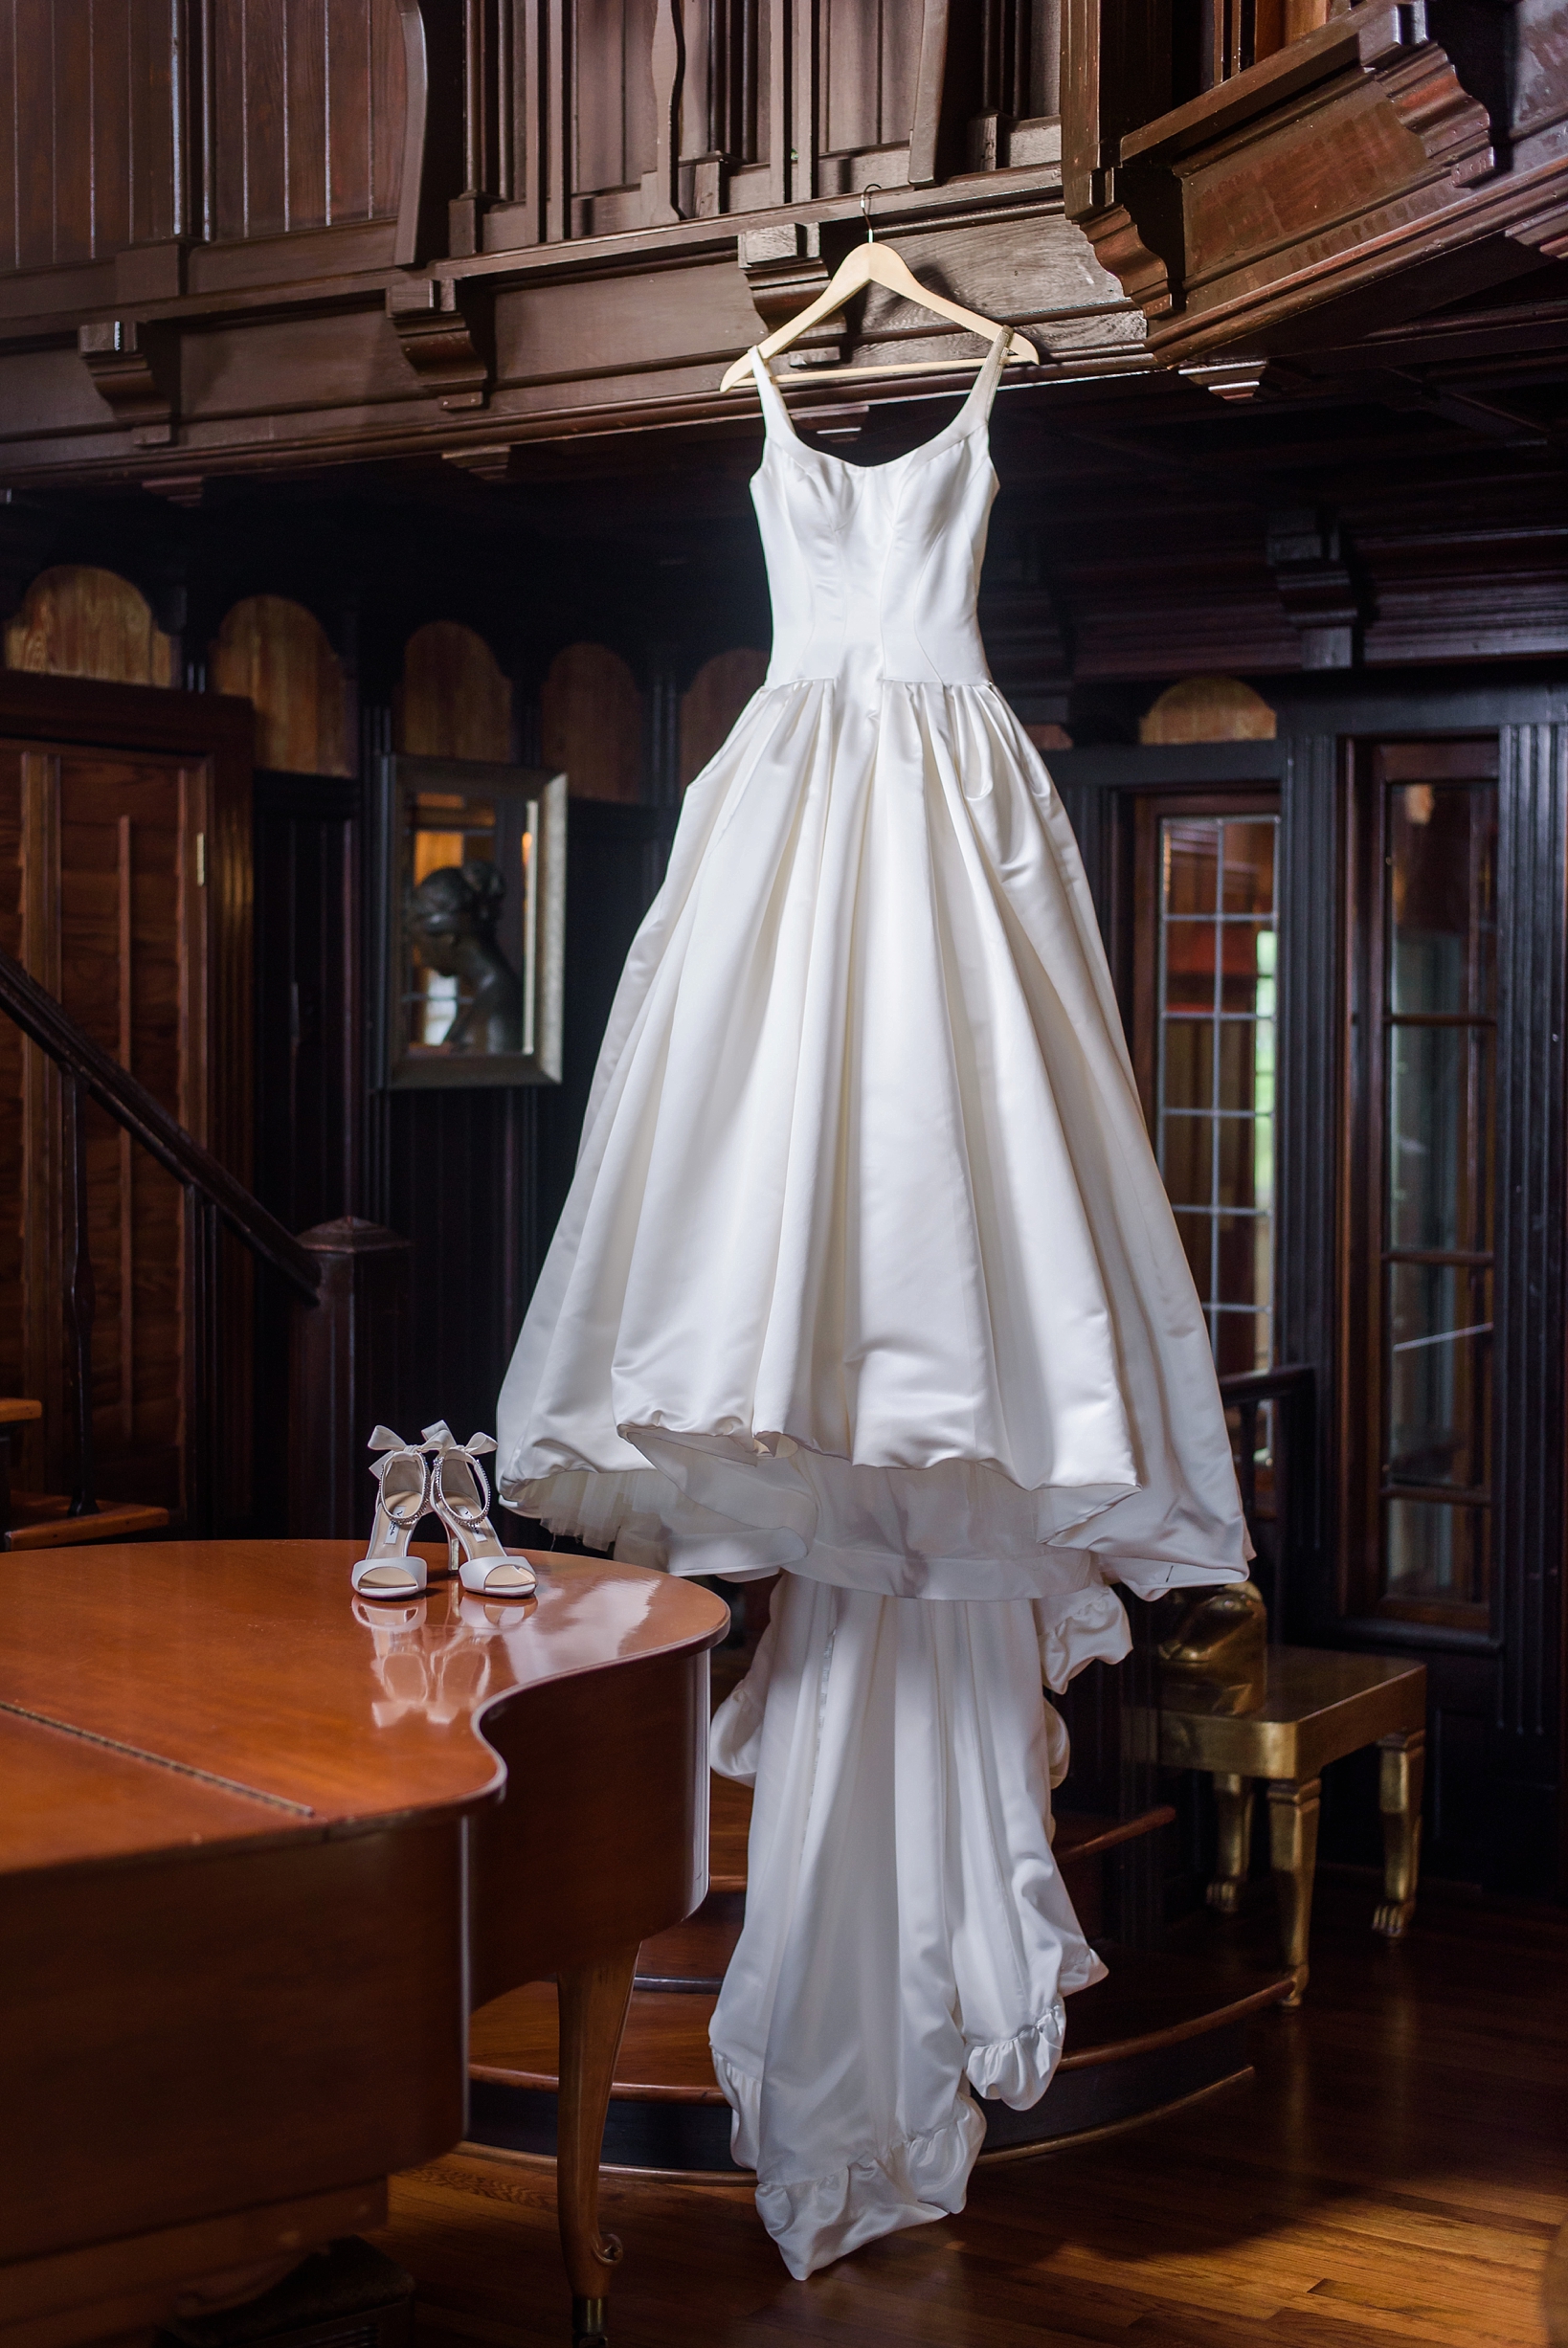 The beautiful wedding dress hanging in the private study of the estate on the halifax by Sarah & Ben Photography